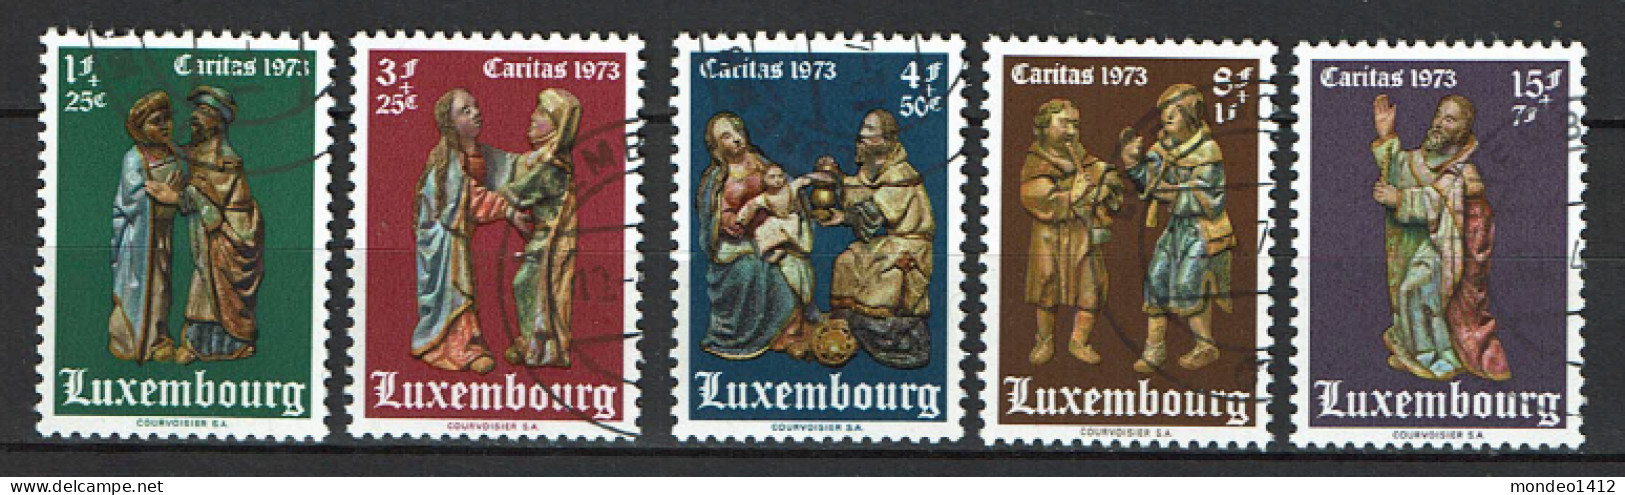 Luxembourg 1973 - YT 821/825 - Religious Statuettes - Charity Issue - Gebraucht